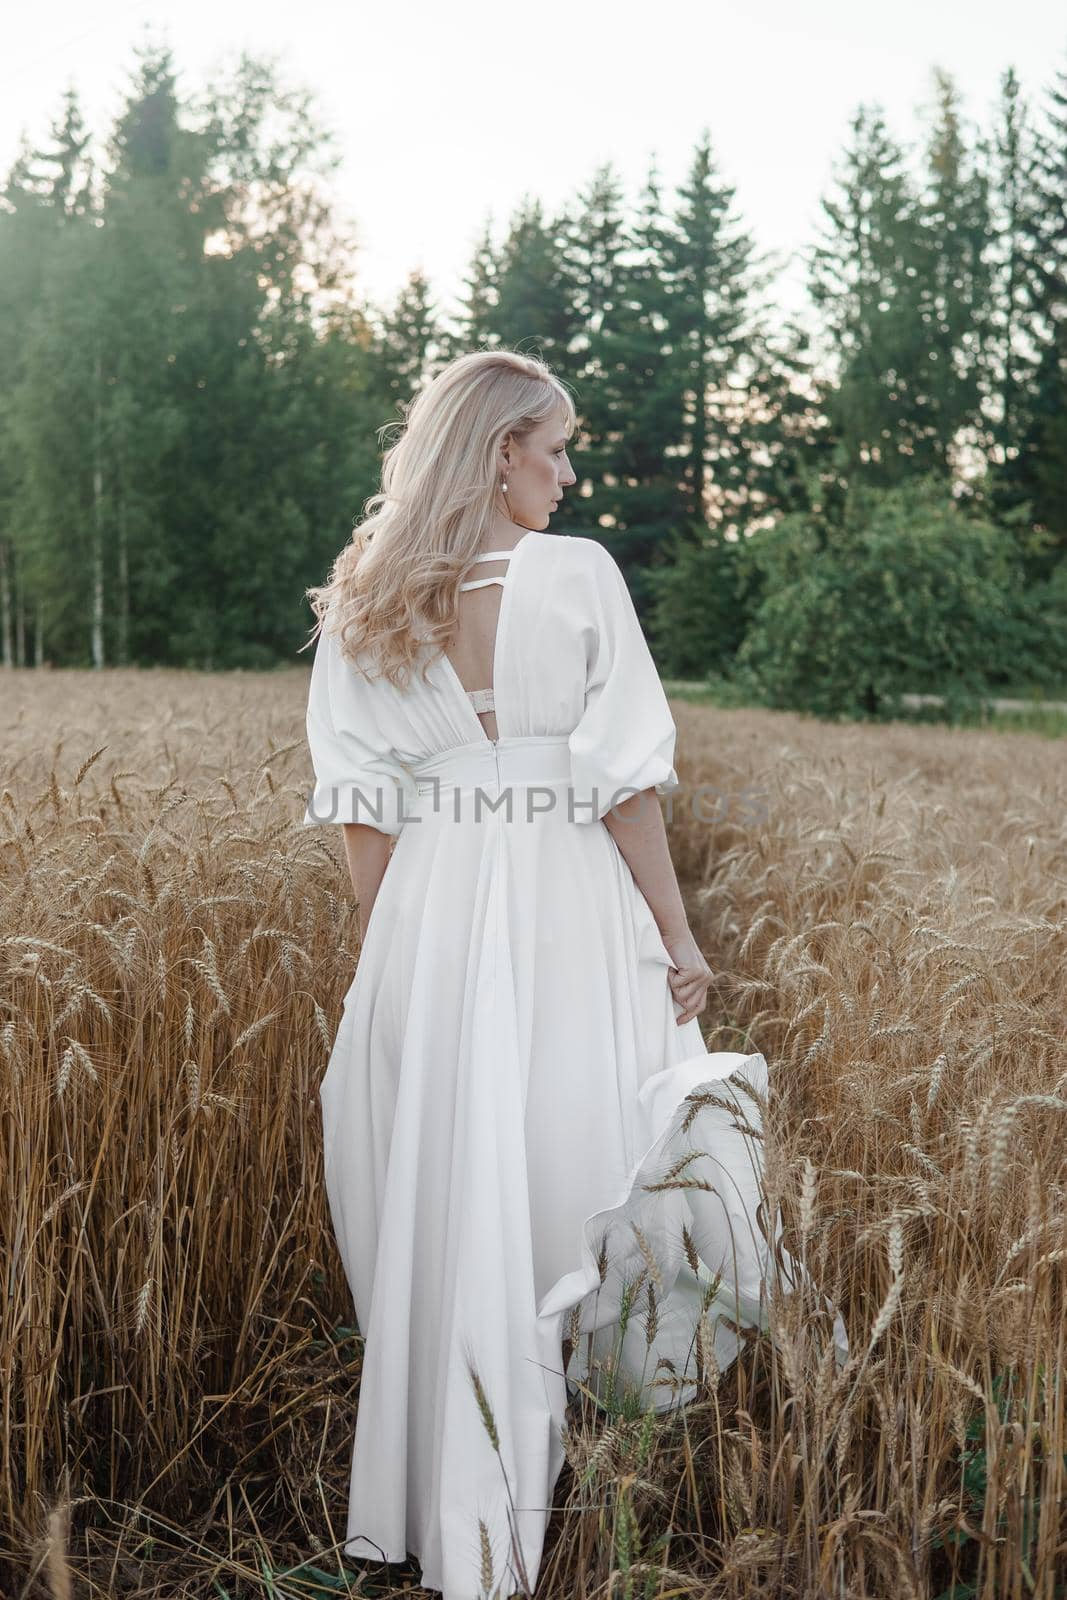 A blonde woman in a long white dress walks in a wheat field. The concept of a wedding and walking in nature by Annu1tochka